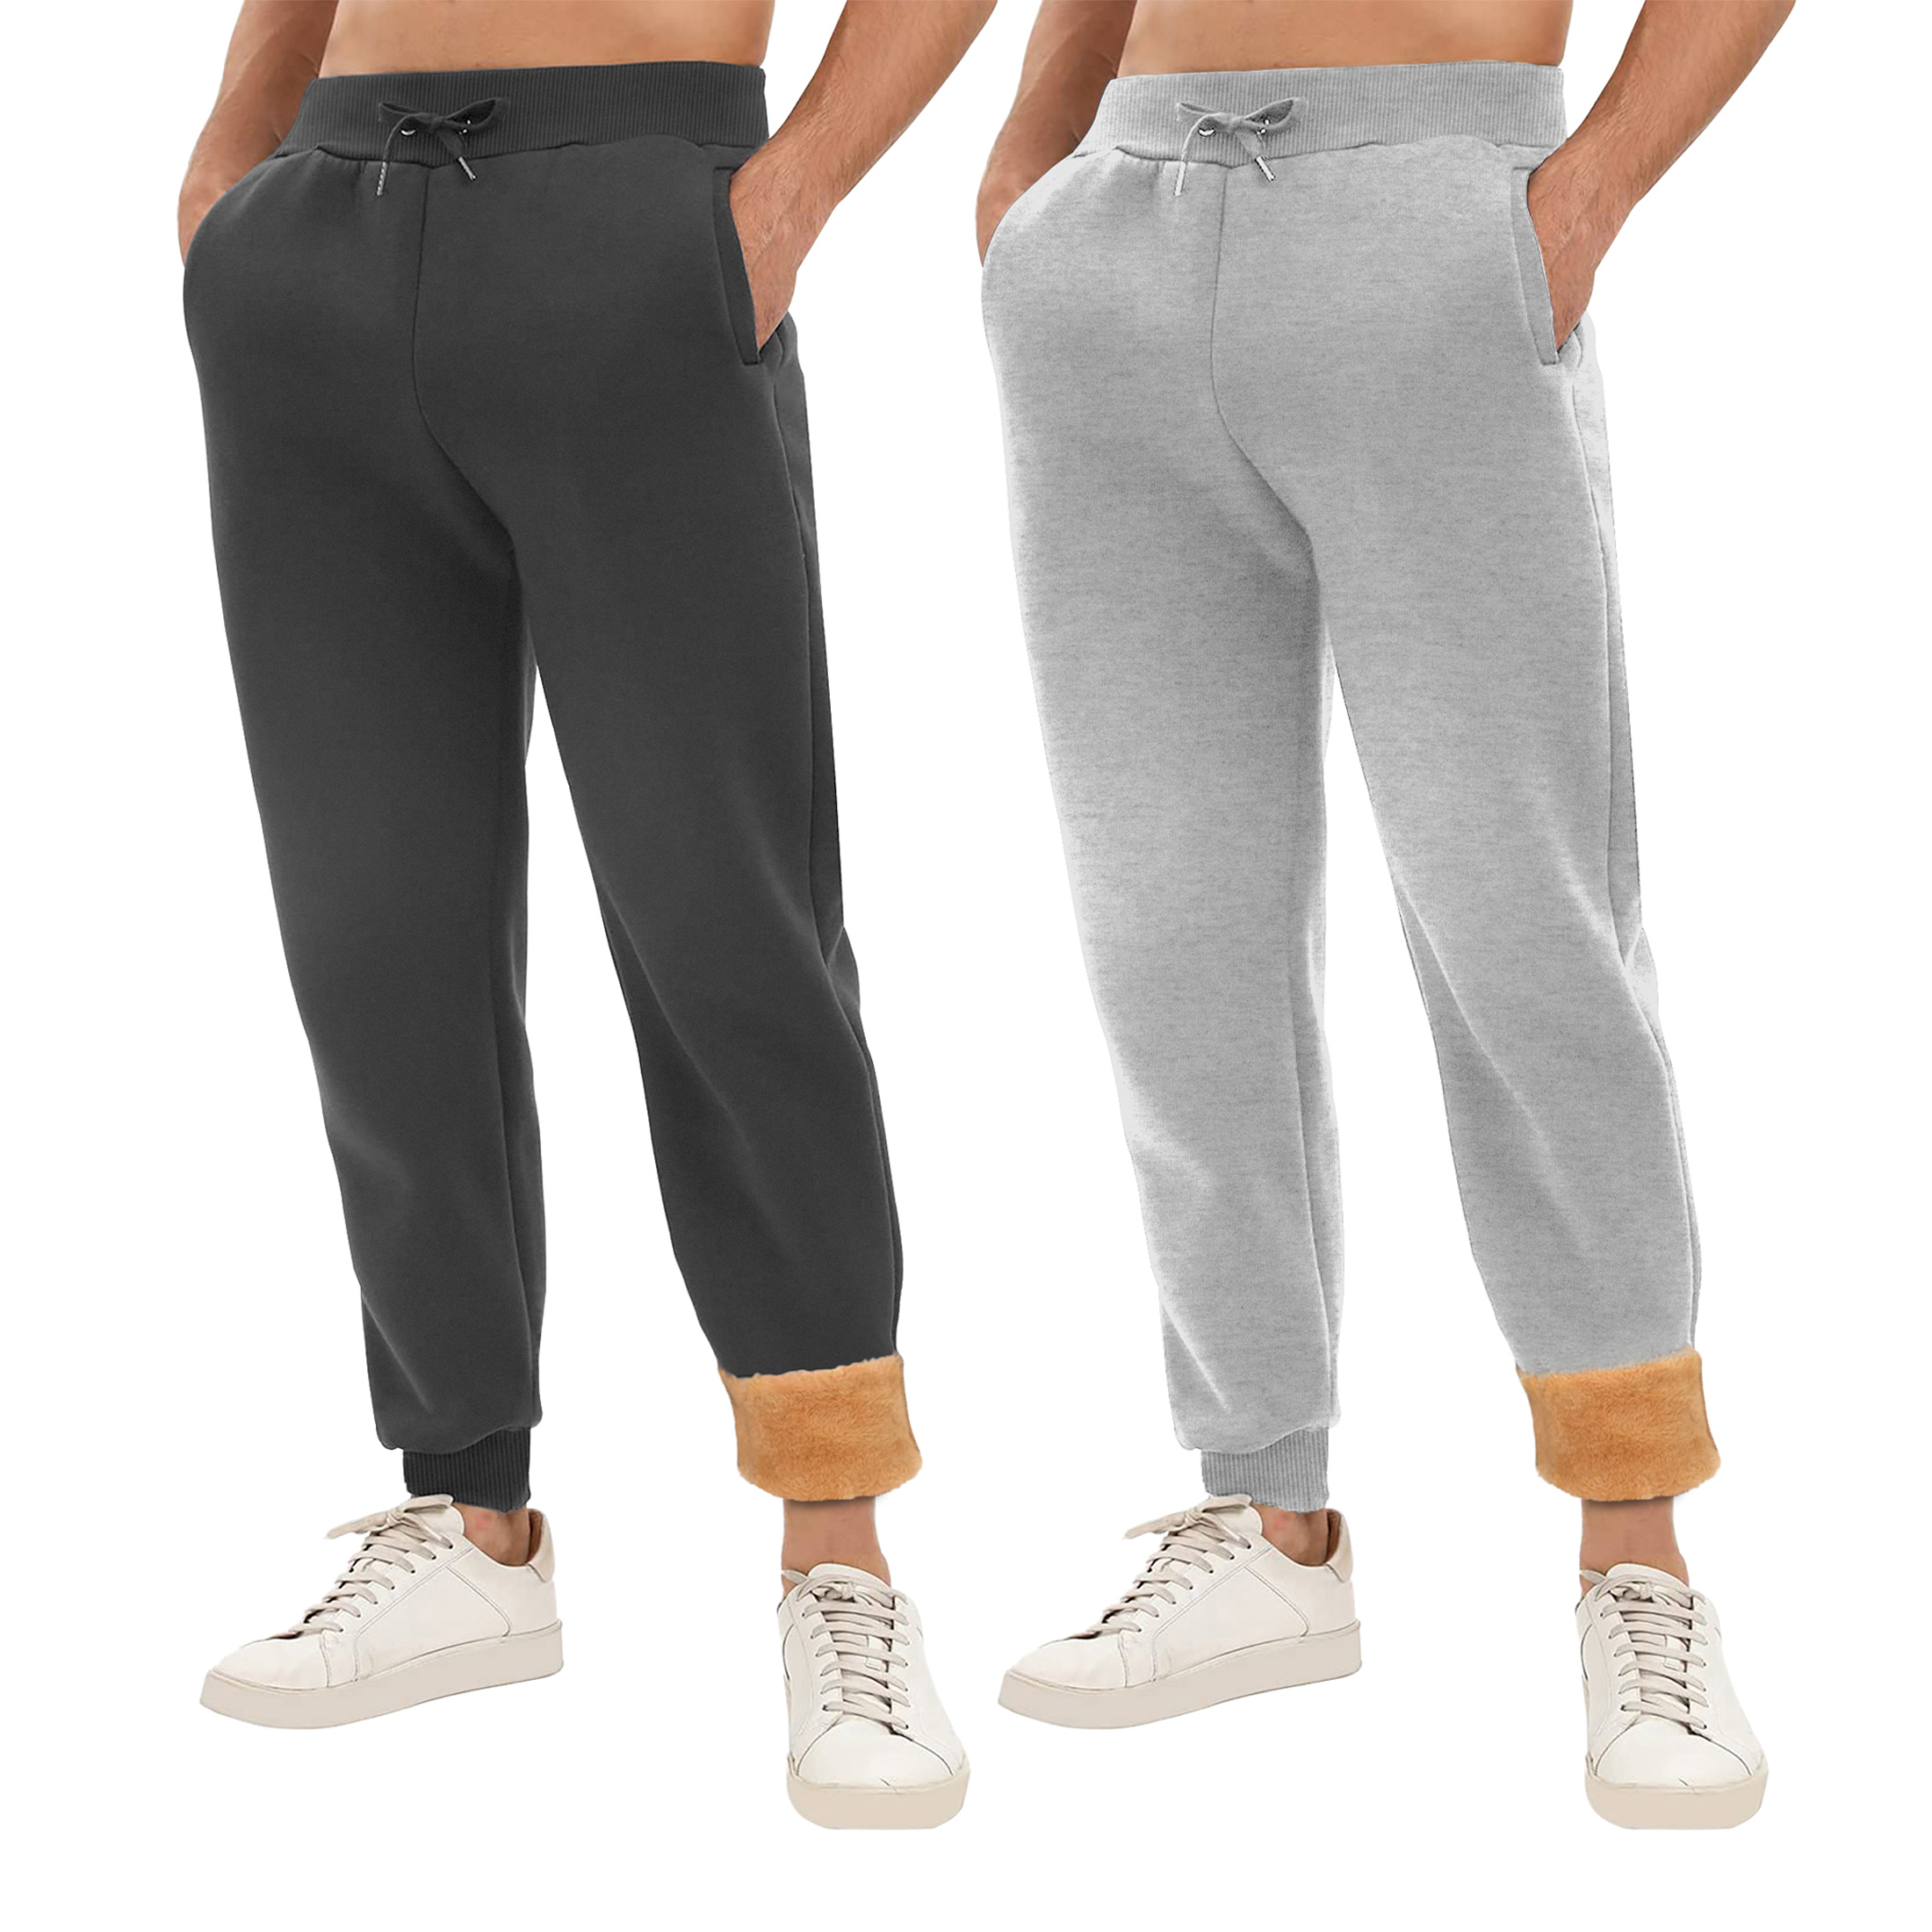 2-Pack: Men's Winter Warm Thick Sherpa Lined Jogger Track Pants With Pockets - Charcoal & Grey, Small